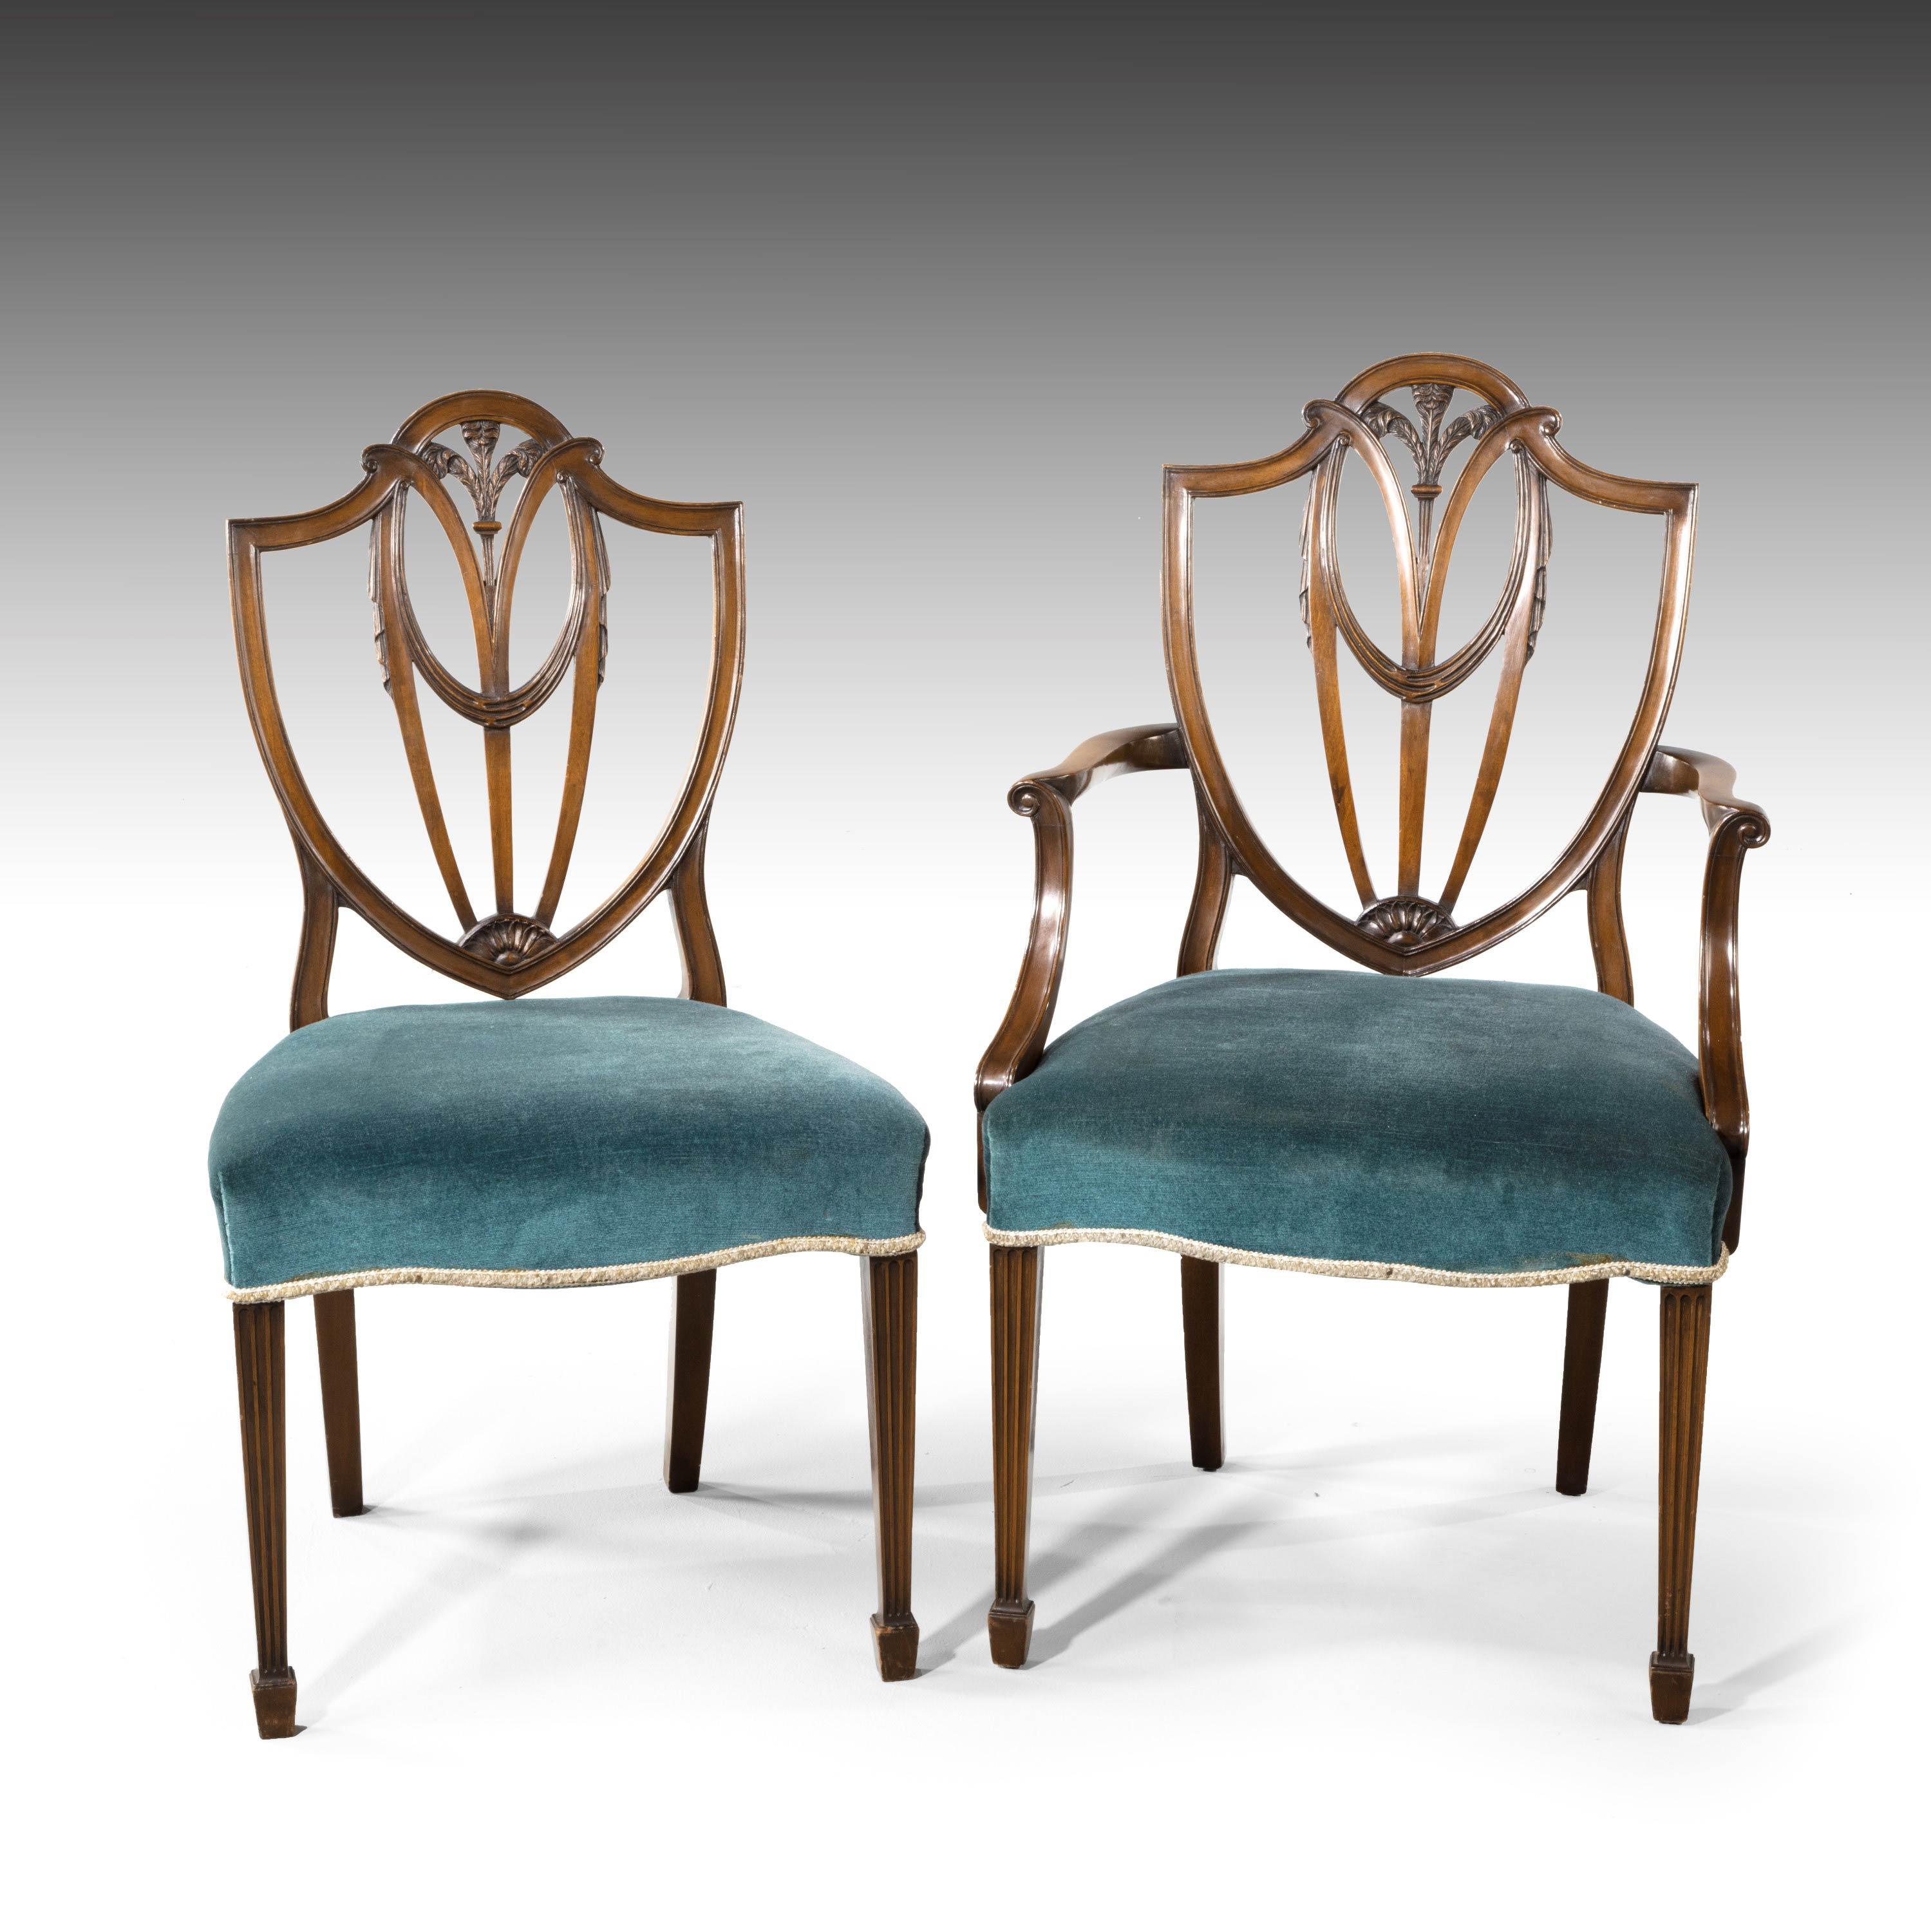 English Most Attractive Set of 8 '6+2' Early 20th Century Hepplewhite Chairs